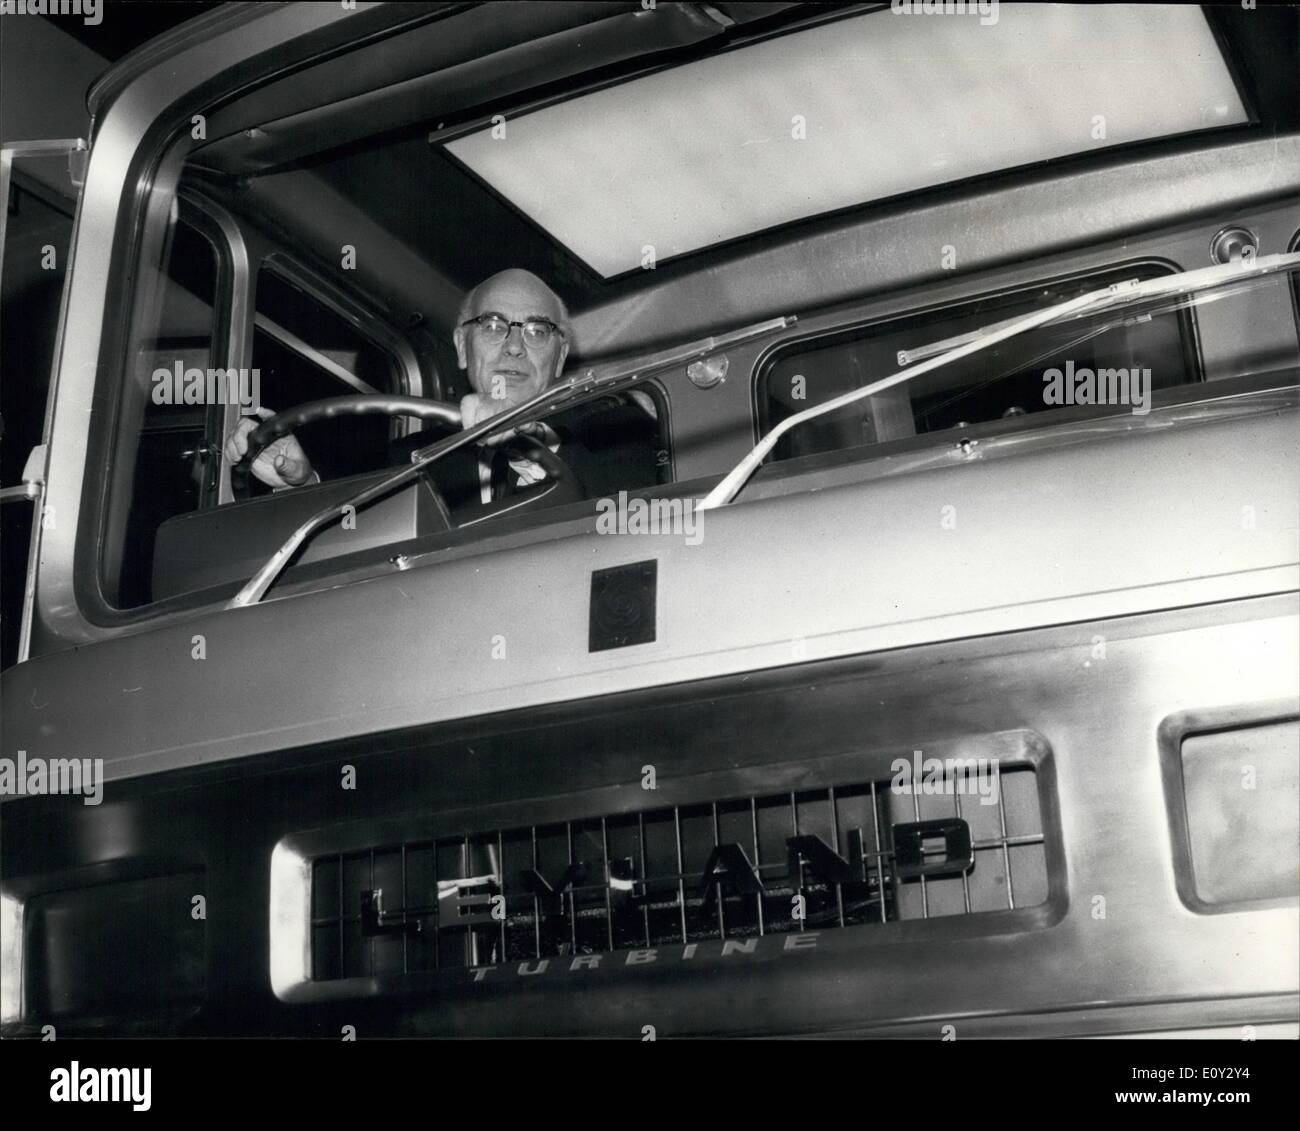 Sep. 09, 1968 - Commercial Motor Show - Press Day. New Gas Turbine Truck: Today was Press Day of the Commercial Motor Show, which opens at Earls Court, London, tomorrow. (Sept. 20th.). On show is British Leyland's 350/400 hp gas turbine truck - This Leyland development will make gas turbine truck. This Leyland development will make gas turbine trucking a practical and economic proposition for the 1970's. Photo shows Sir Donald Stokes , Leyland's chairman -- seen at the wheel of the new gas turbine truck, at Earls Court today. Stock Photo